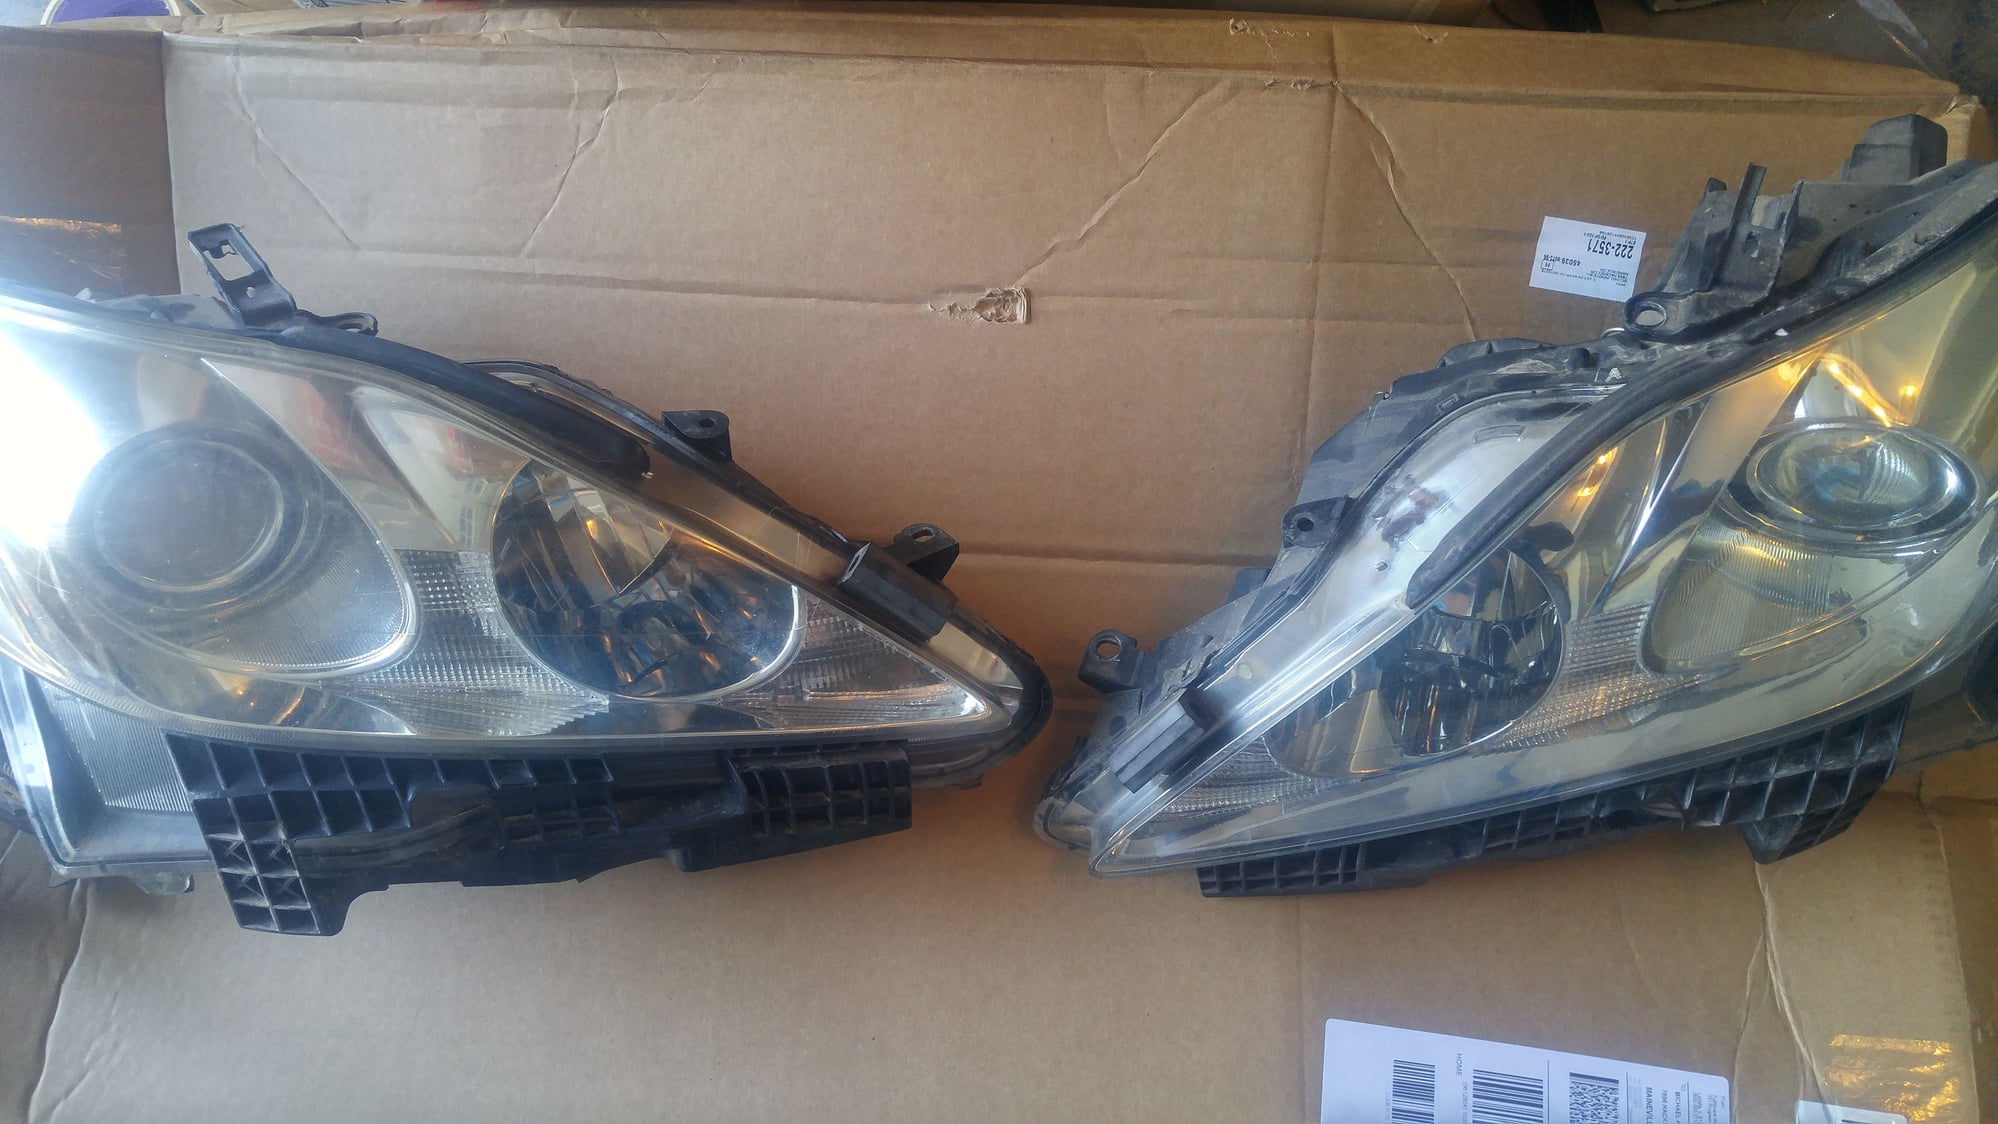 Lights - 2006-13 IS headlights - Used - 2006 to 2013 Lexus IS350 - 2006 to 2013 Lexus IS250 - 2006 to 2013 Lexus IS F - Mason, OH 45040, United States